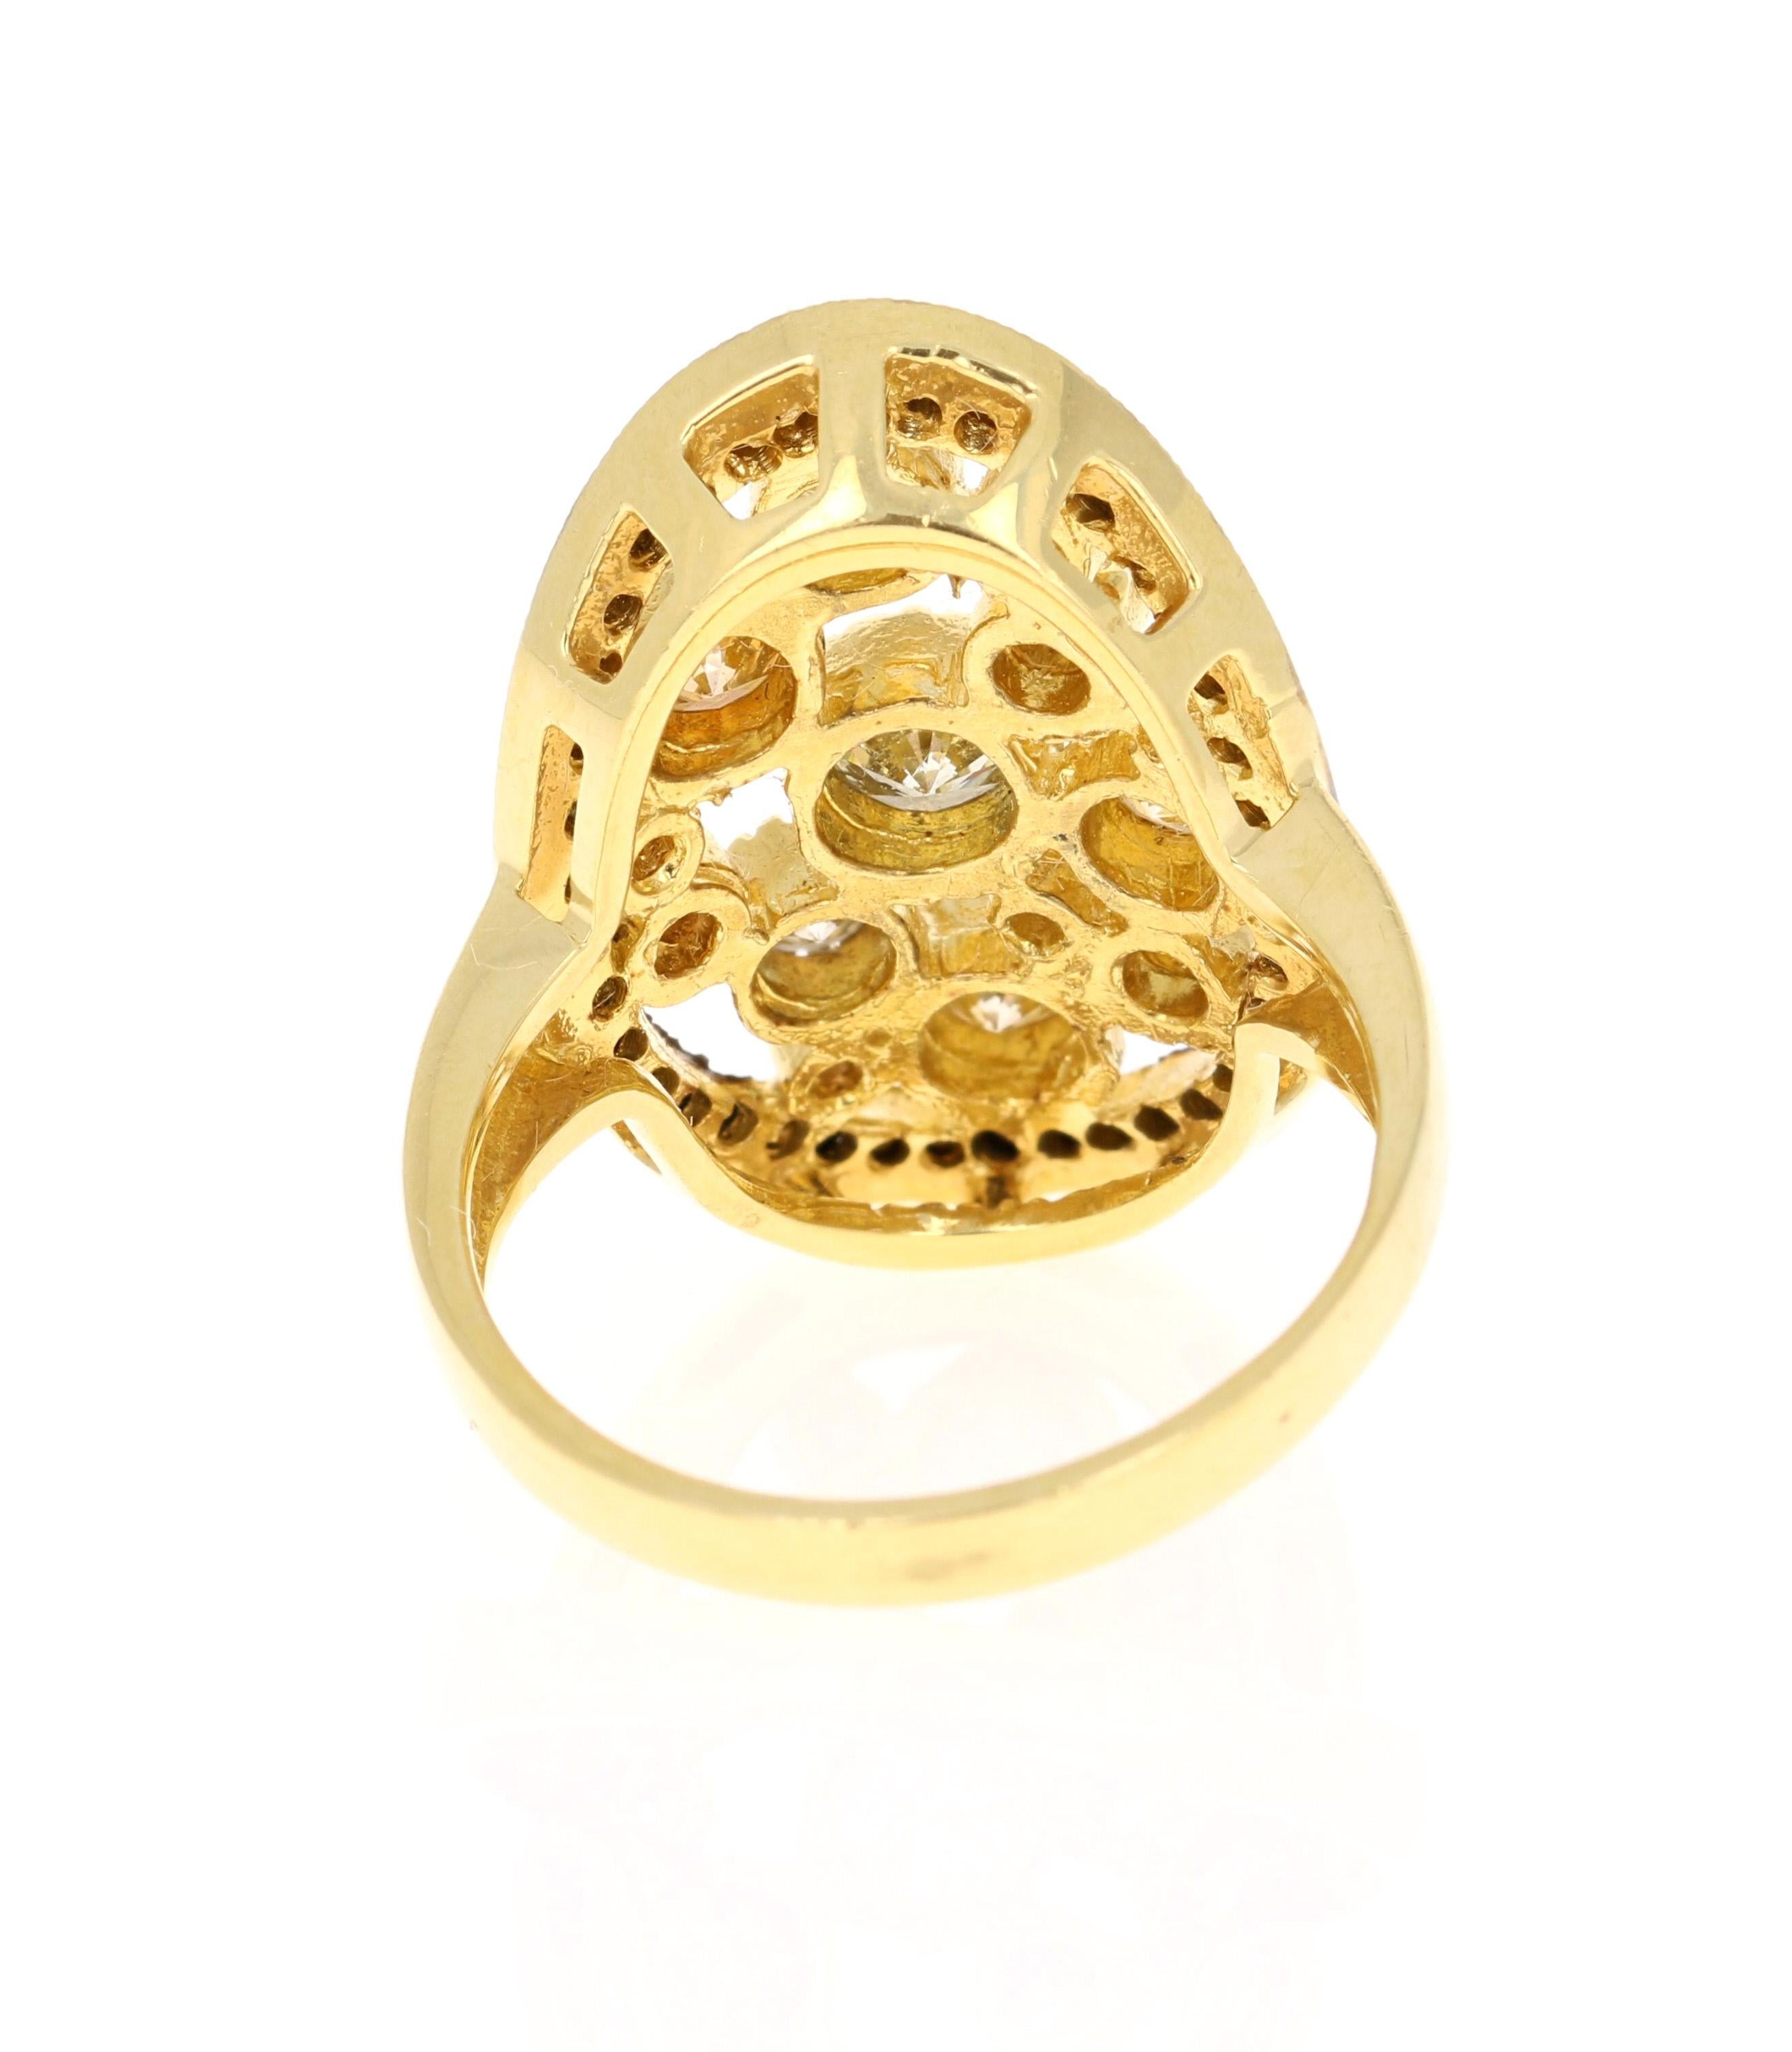 Round Cut 2.11 Carat Natural Fancy Color Diamond 18 Karat Yellow Gold Cocktail Ring For Sale